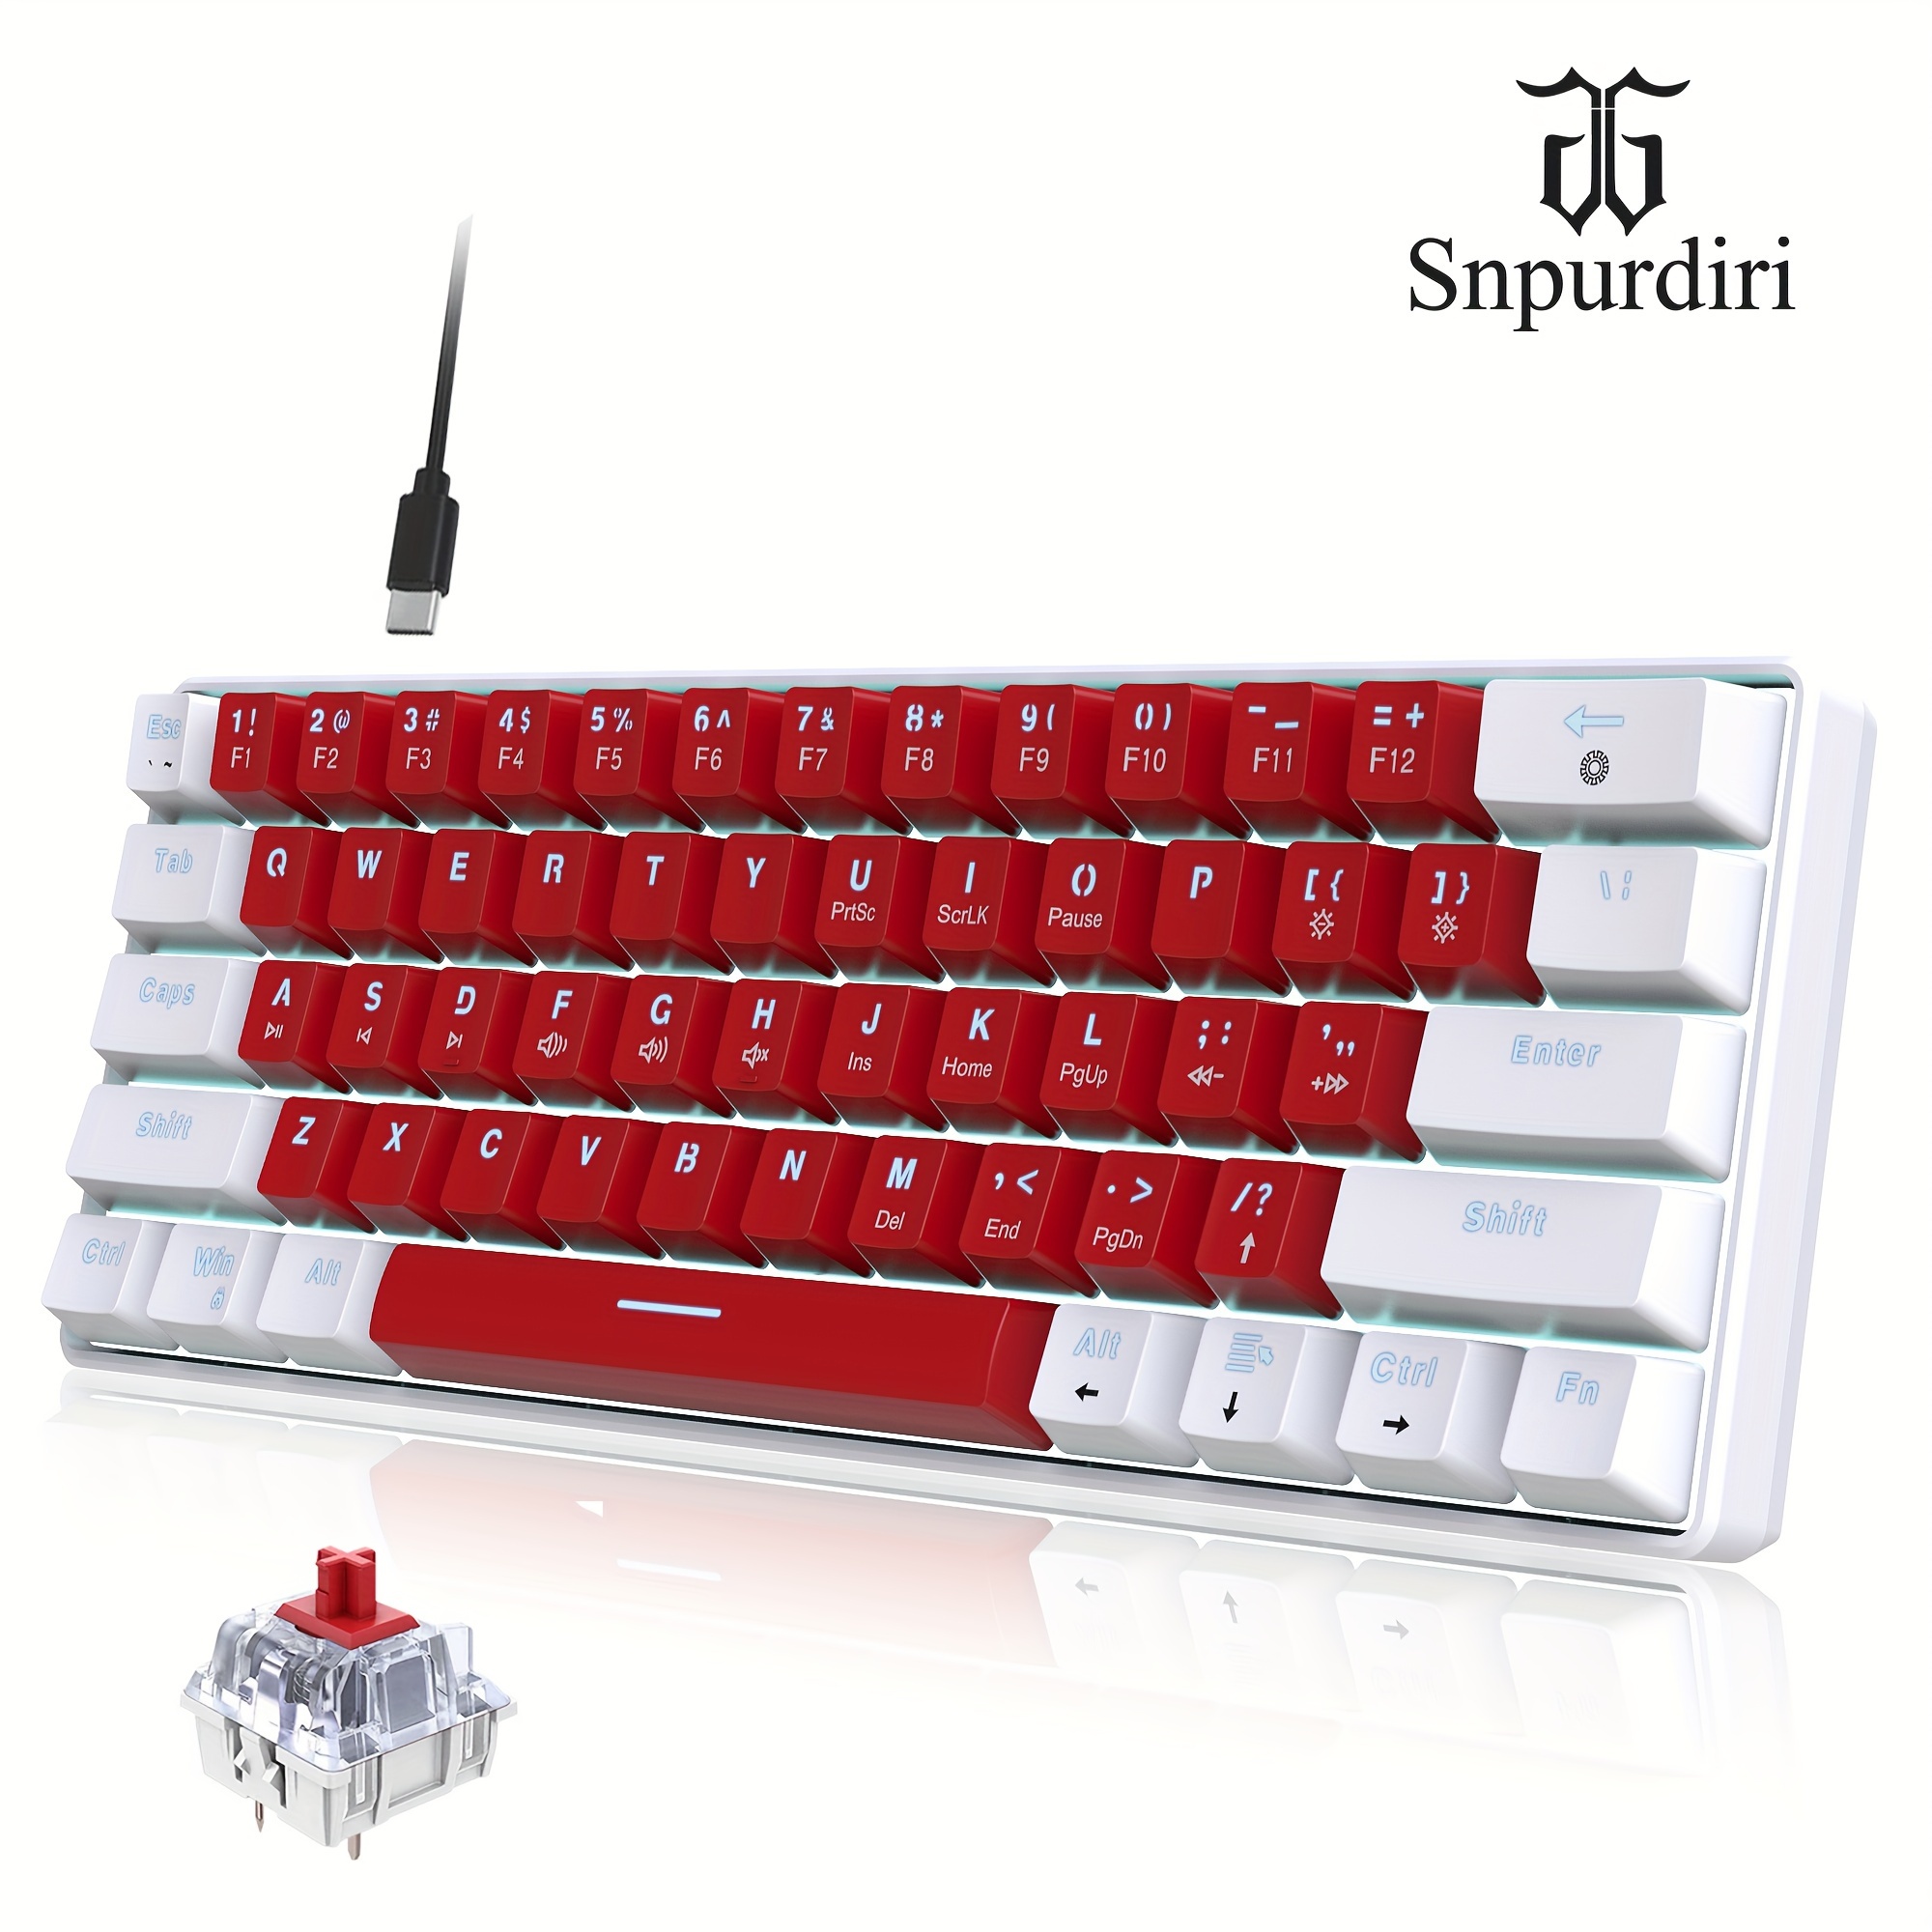 

Snpurdiri 61-key Mechanical Wired 60% Mechanical Gaming Keyboard, Red Axis Keys, Portable Mini Keyboard, Suitable For Windows Laptops - White And Red